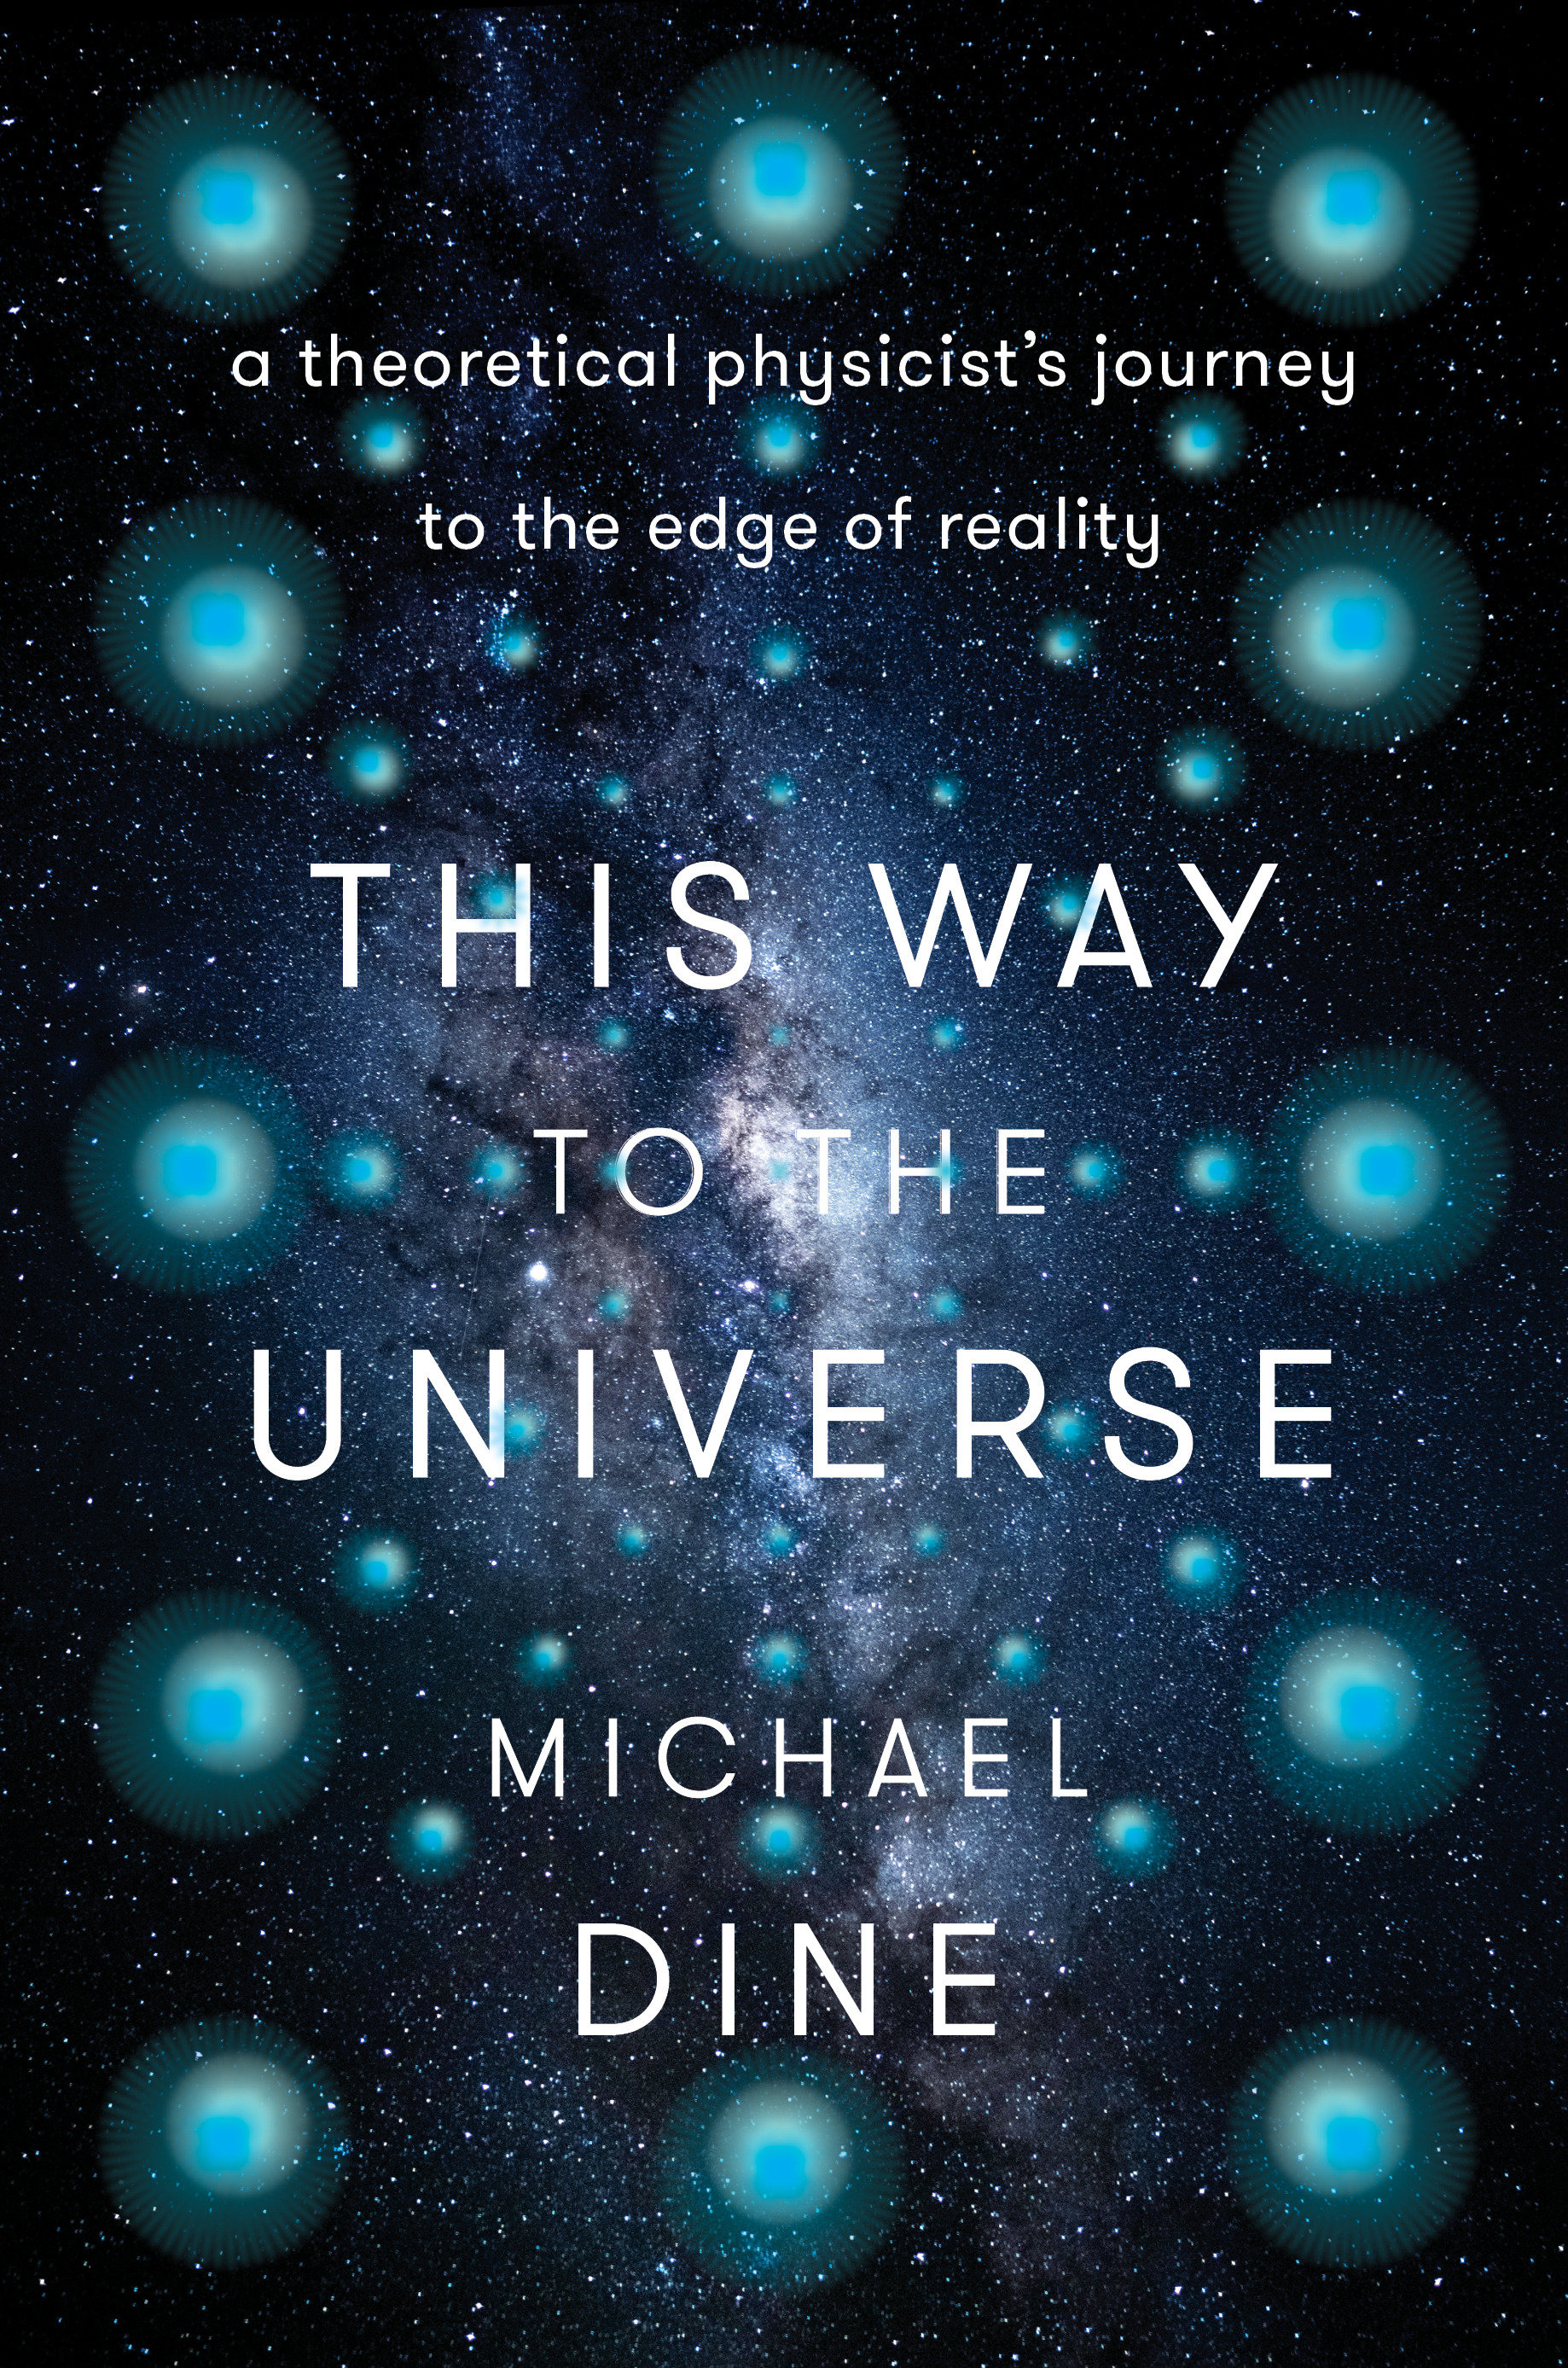 This Way To The Universe (Hardcover Book)